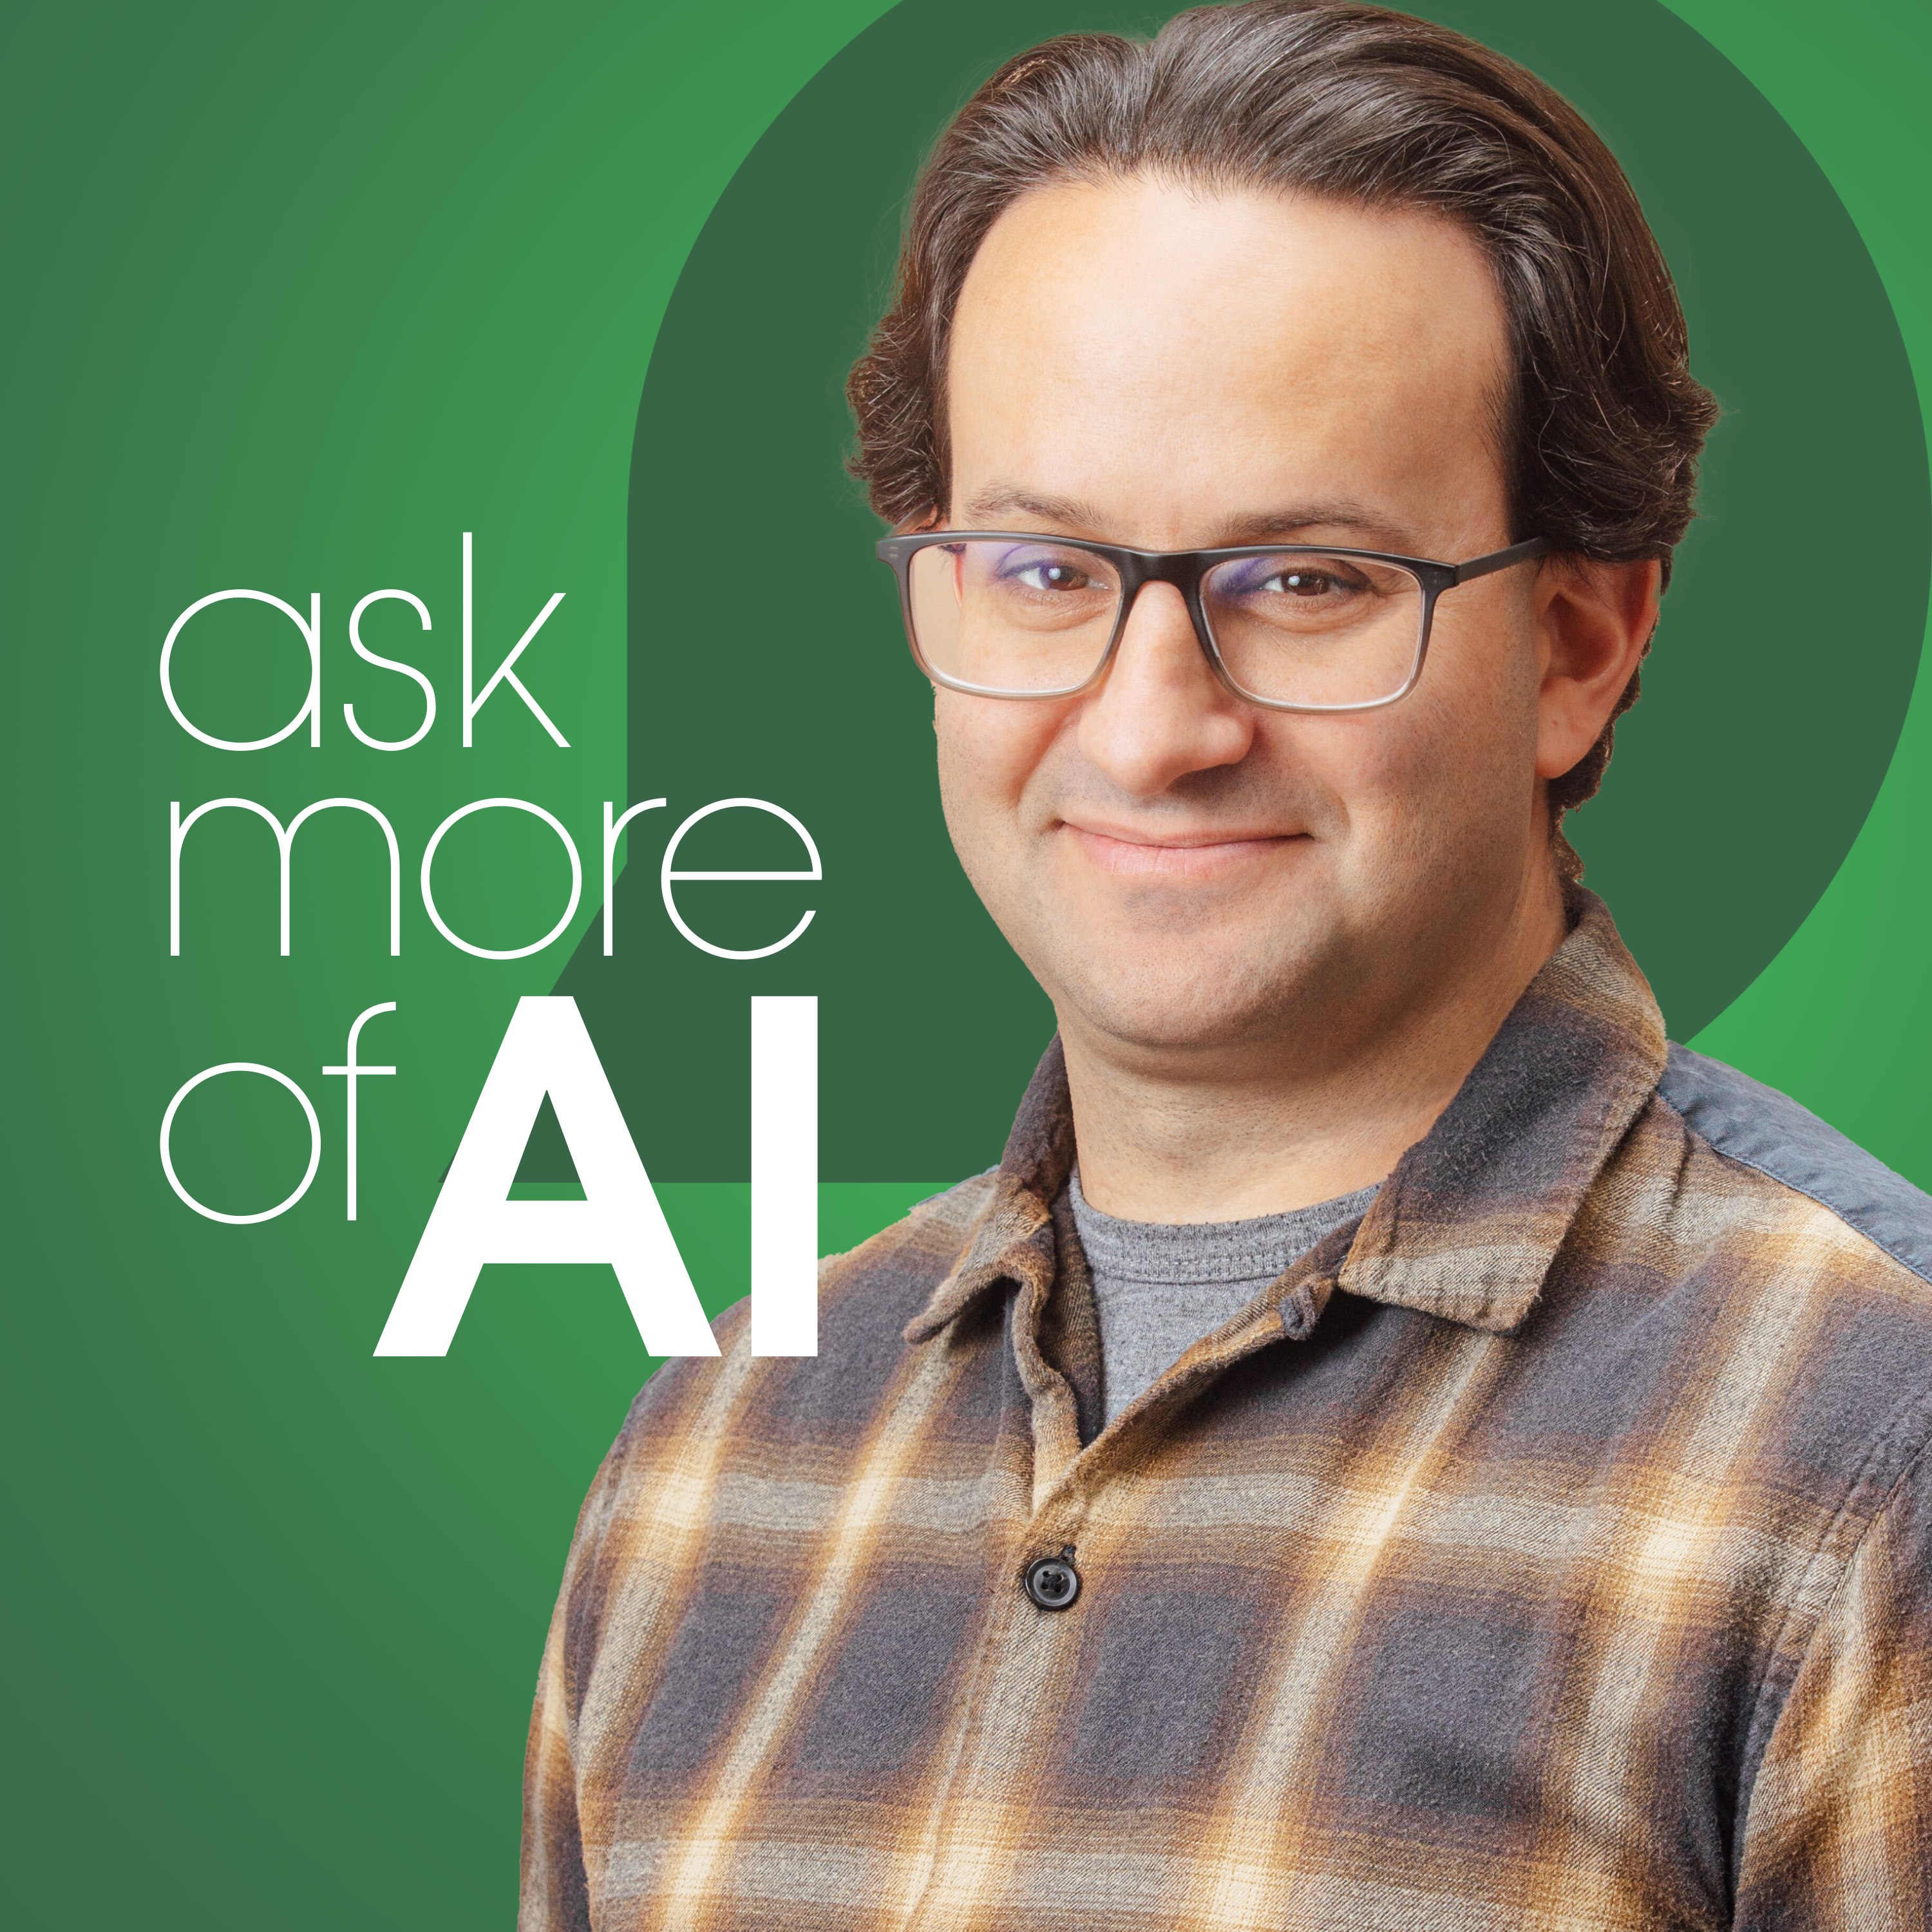 Anthropic Co-founder on Claude 3, Constitutional AI, and AGI | Ask More of AI